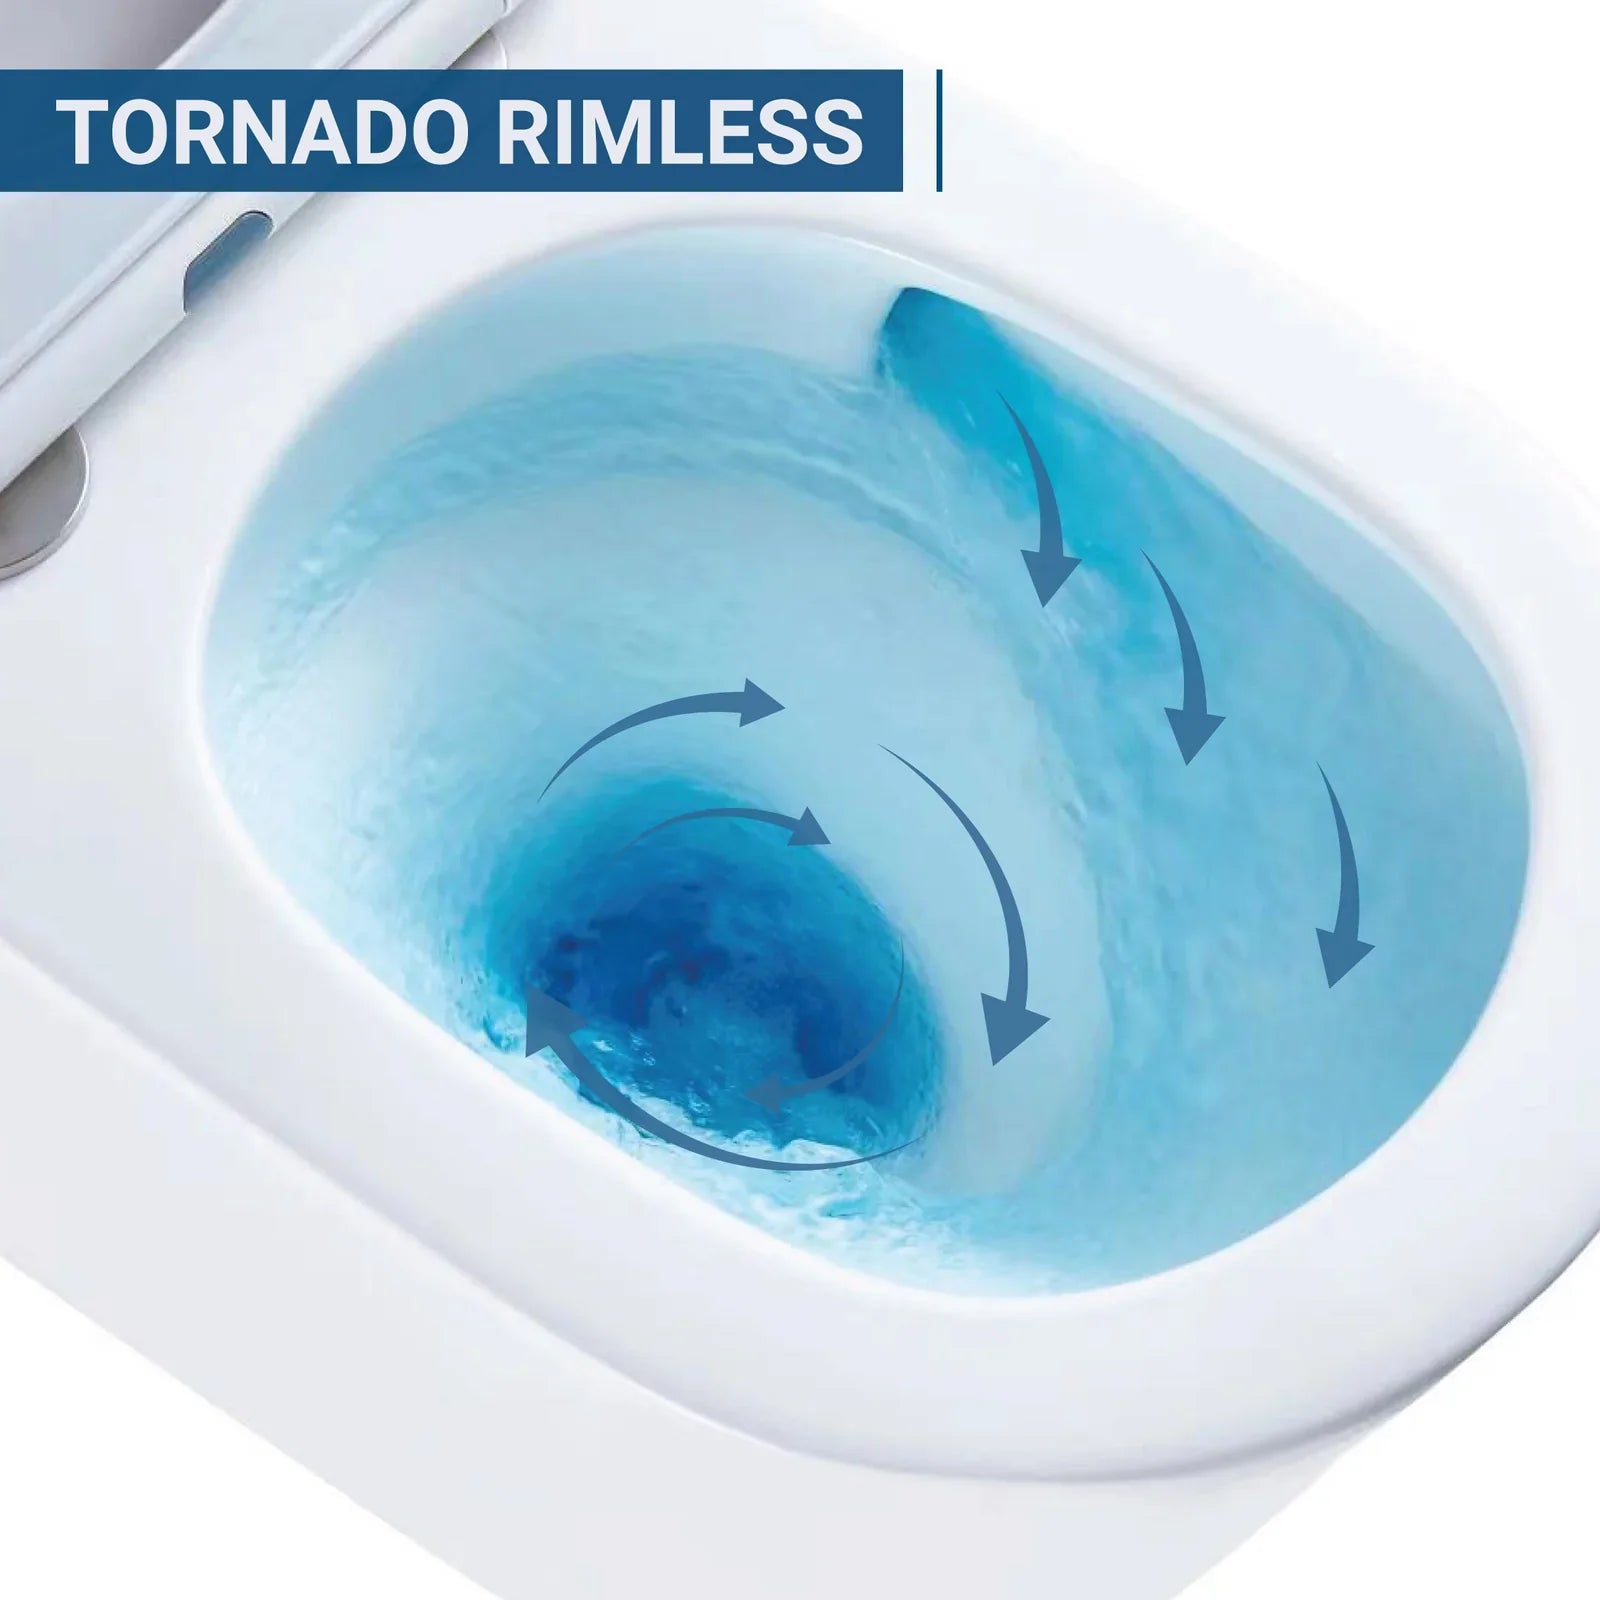 Granlusso Amalfi Rimless Tornado Flushing System WC with Soft Close Quick Release Seat